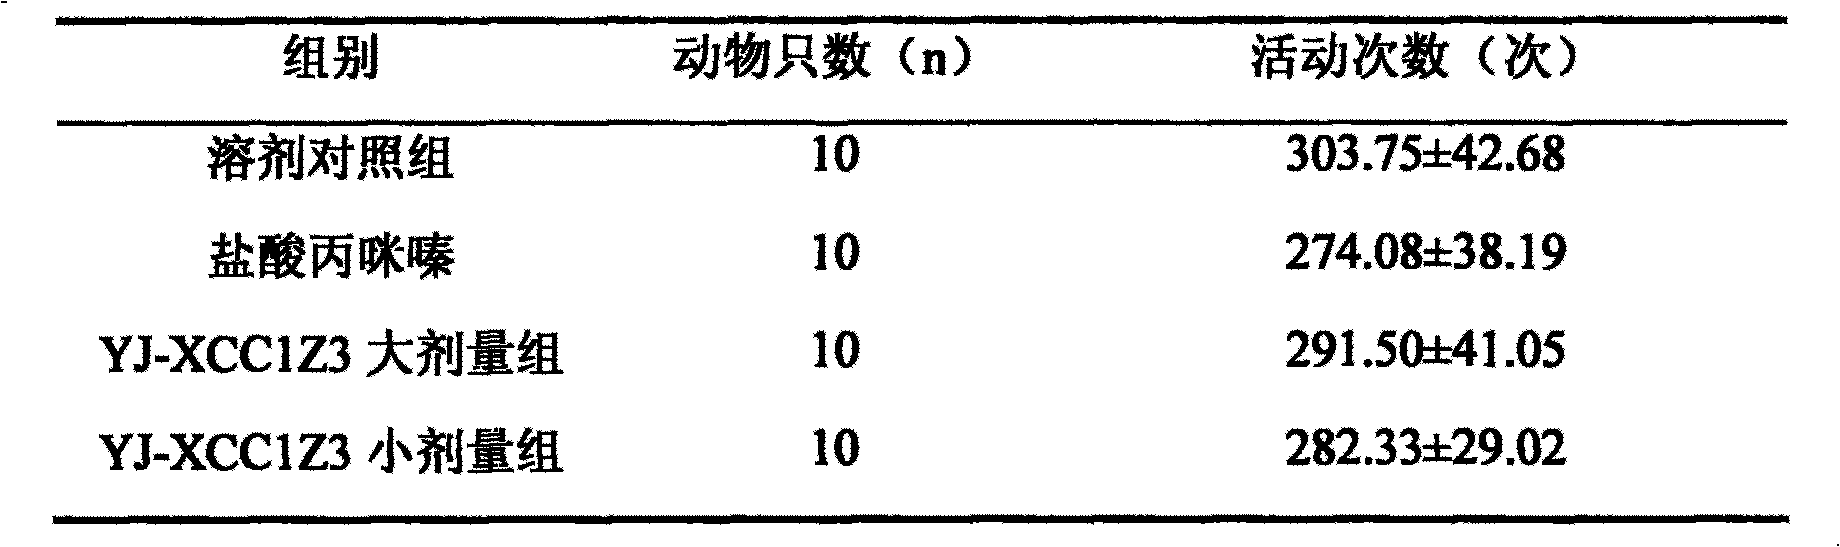 Anti-depression medicament as well as preparation method and application thereof